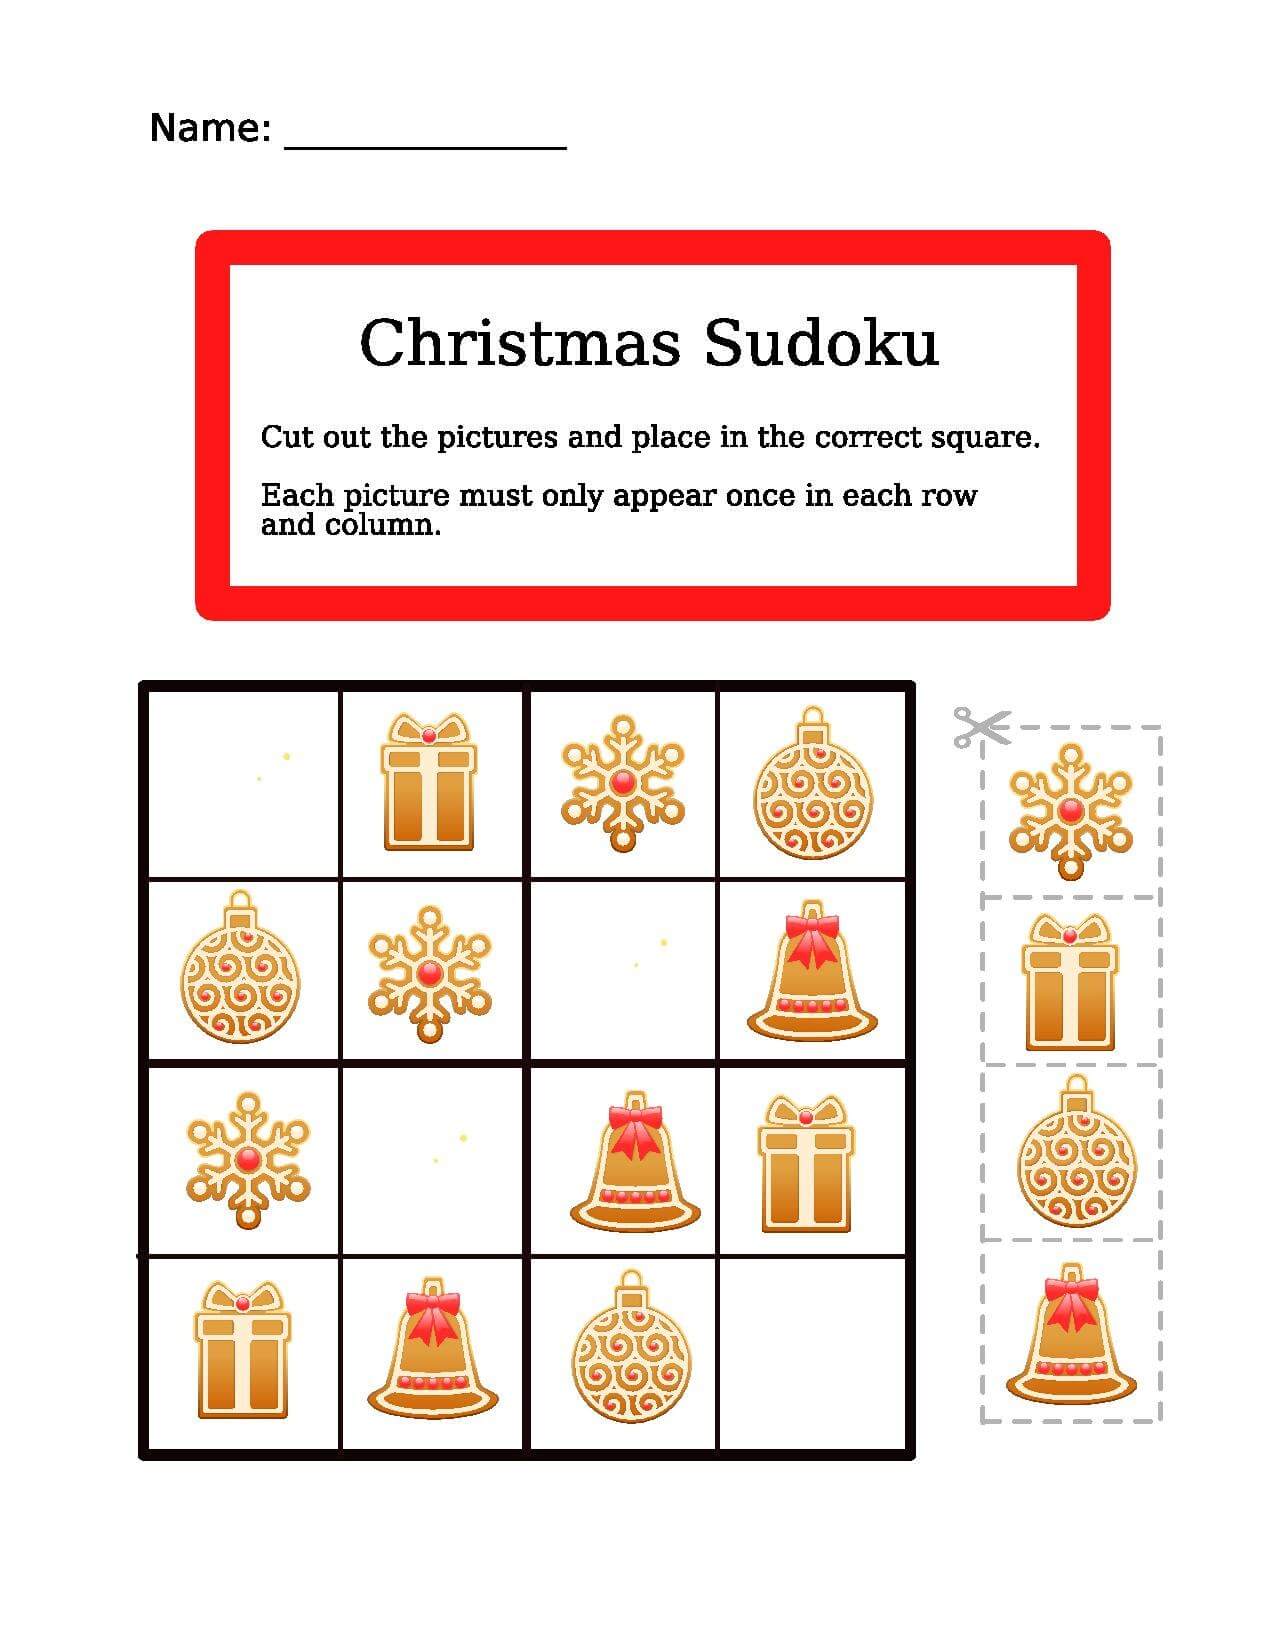 Christmas easy picture sudoku worksheet free printable puzzle games